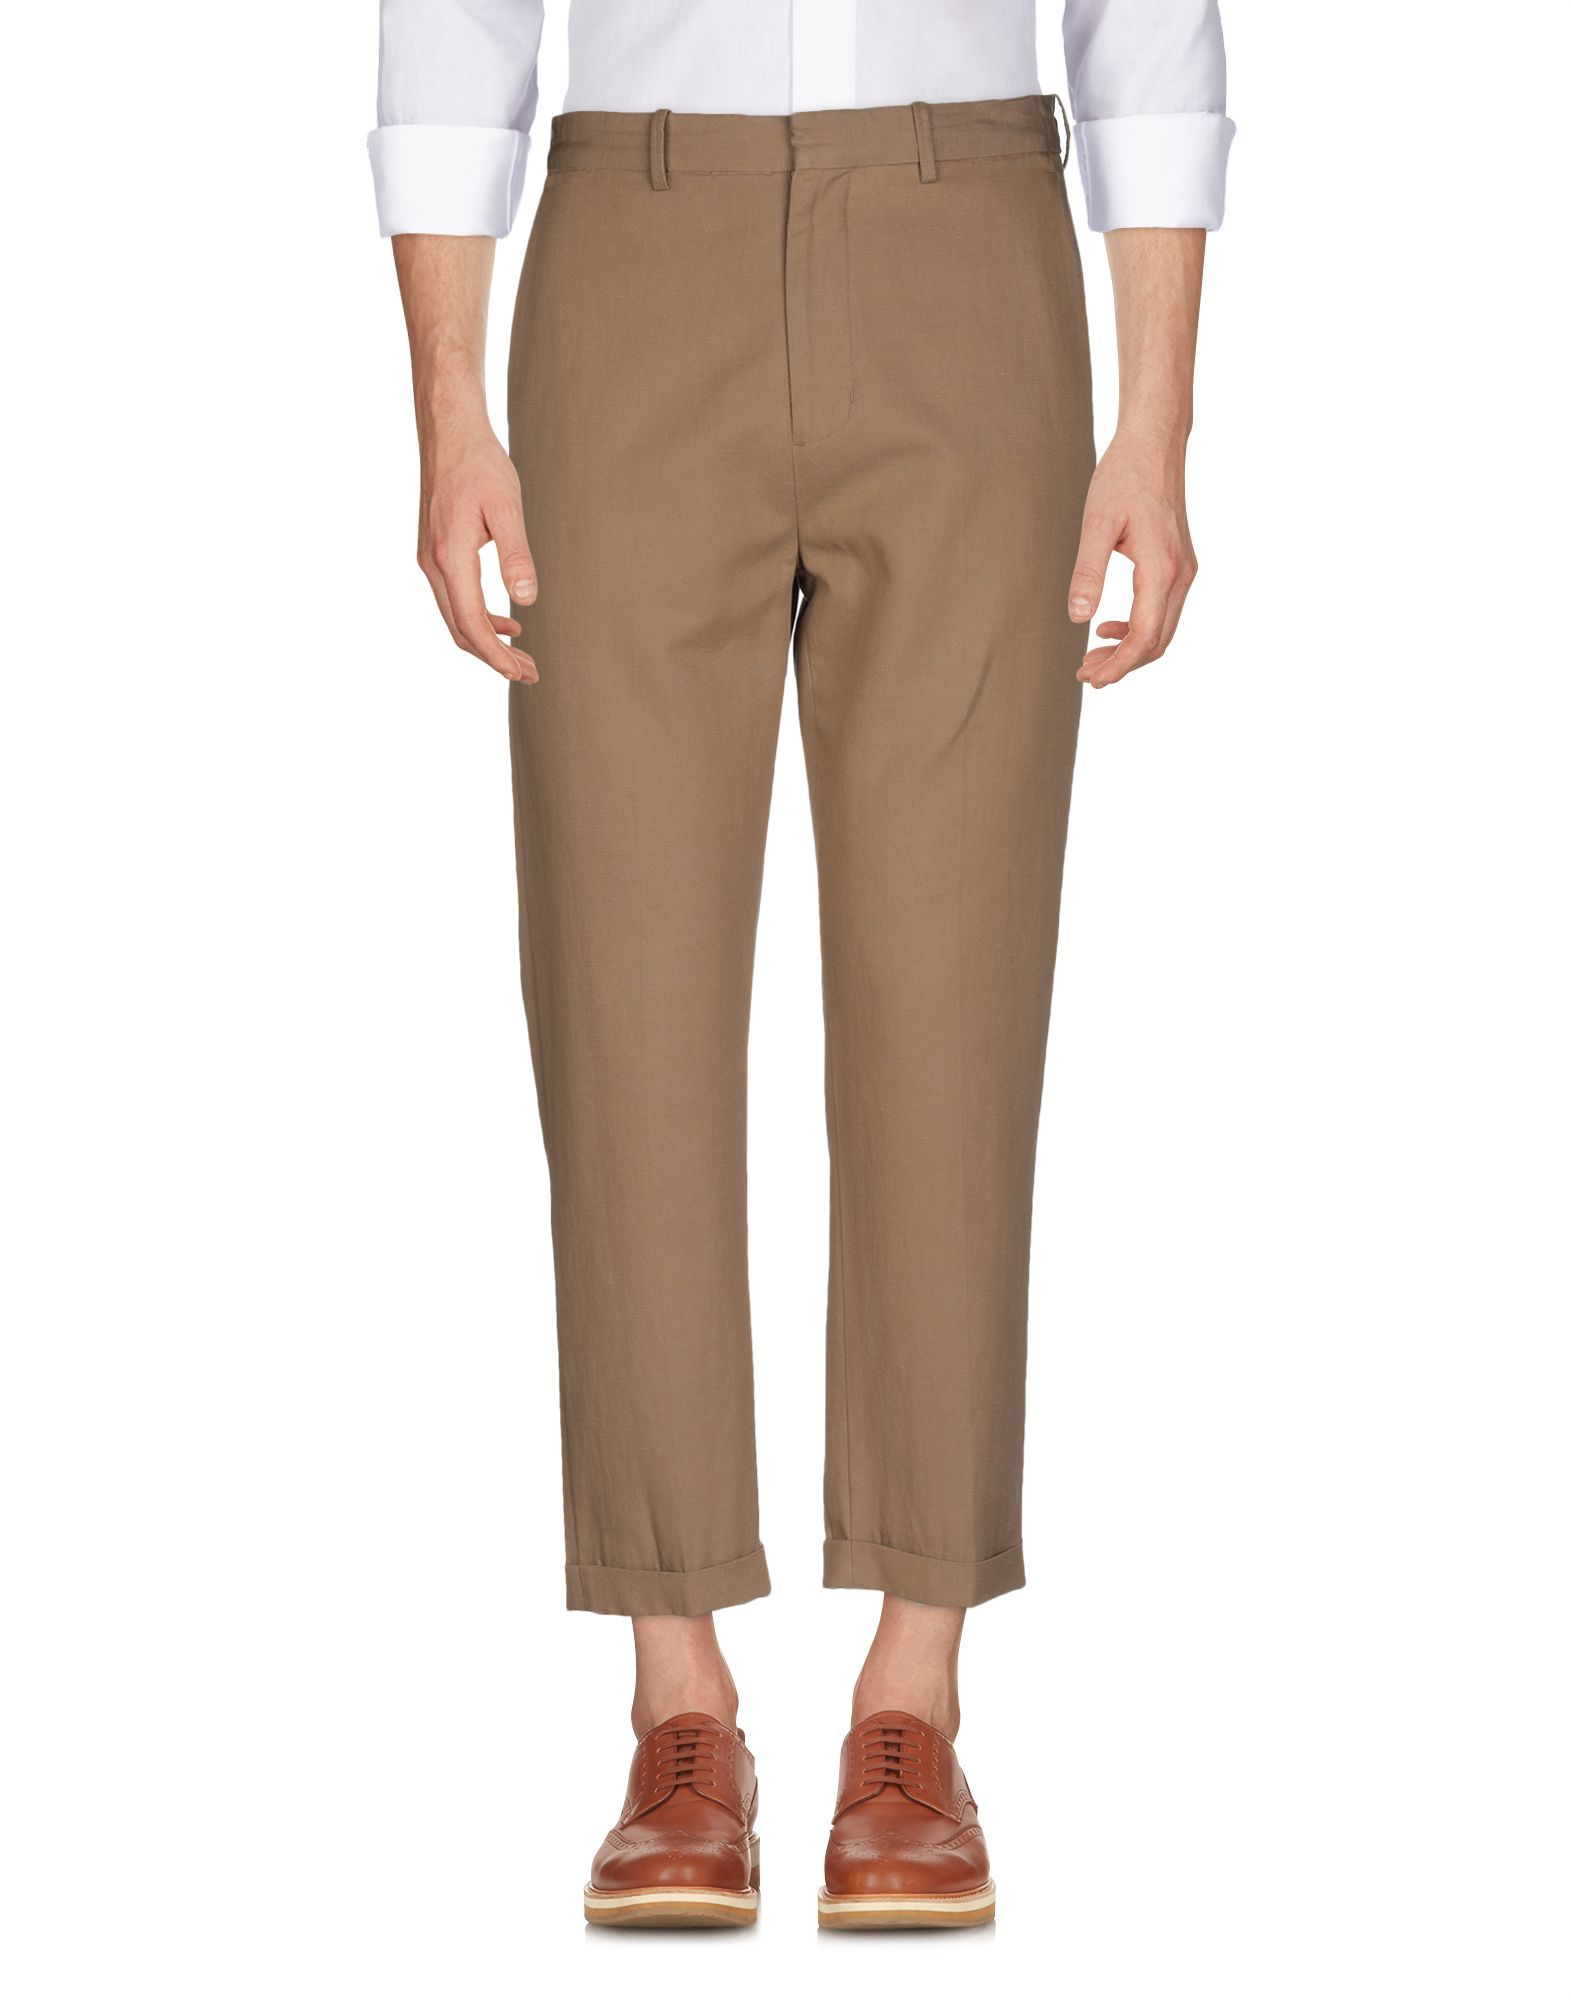 Twill<br>No appliqués<br>Basic solid colour<br>High waisted<br>Slim fit<br>Tapered leg<br>Hook-and-bar, zip<br>Multipockets<br>Cuffed hems<br>Chinos<br>